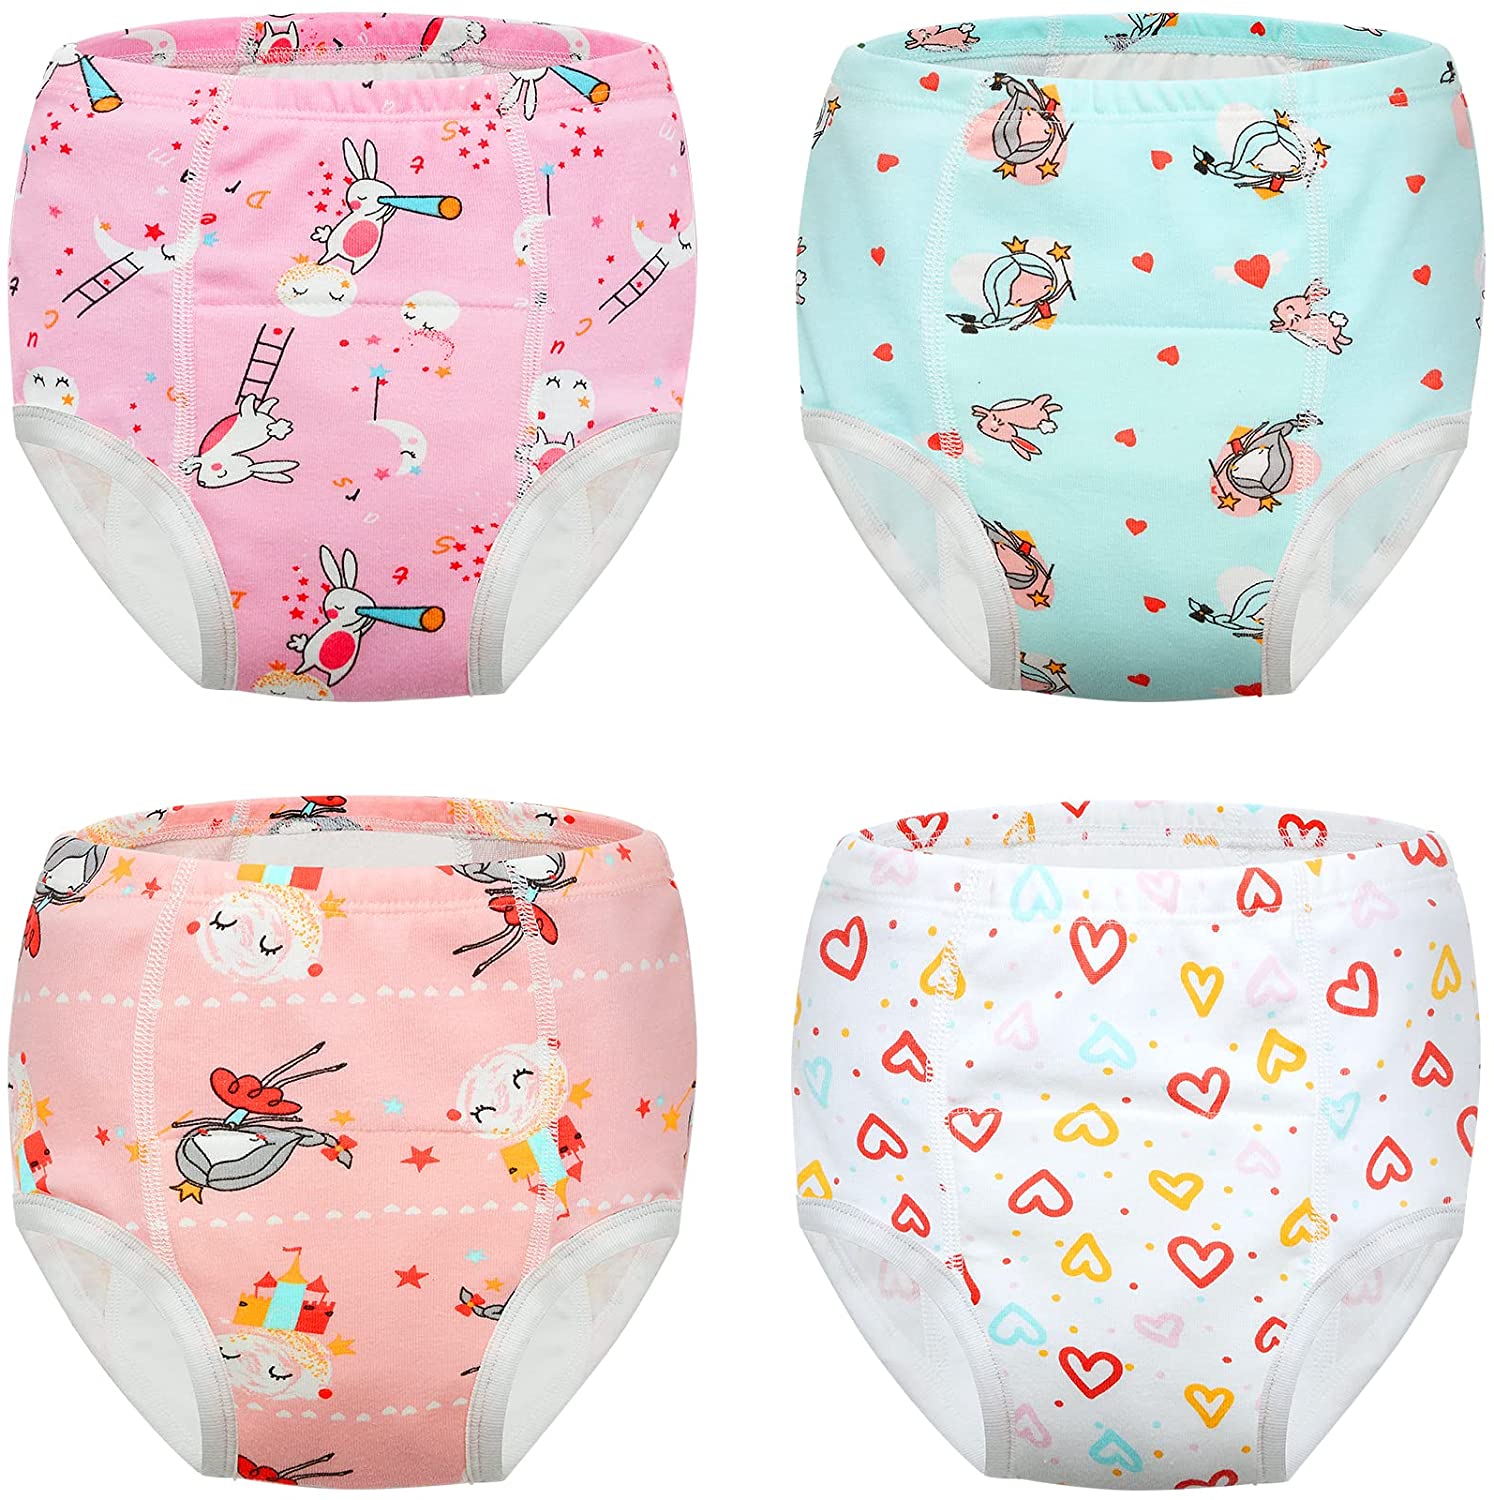  6 Packs Absorption Toddler Training Underwear For Girls 3T  Cotton Reusable Potty Training Underwear For Girls 3T Girl Underwear Potty Training  Pants